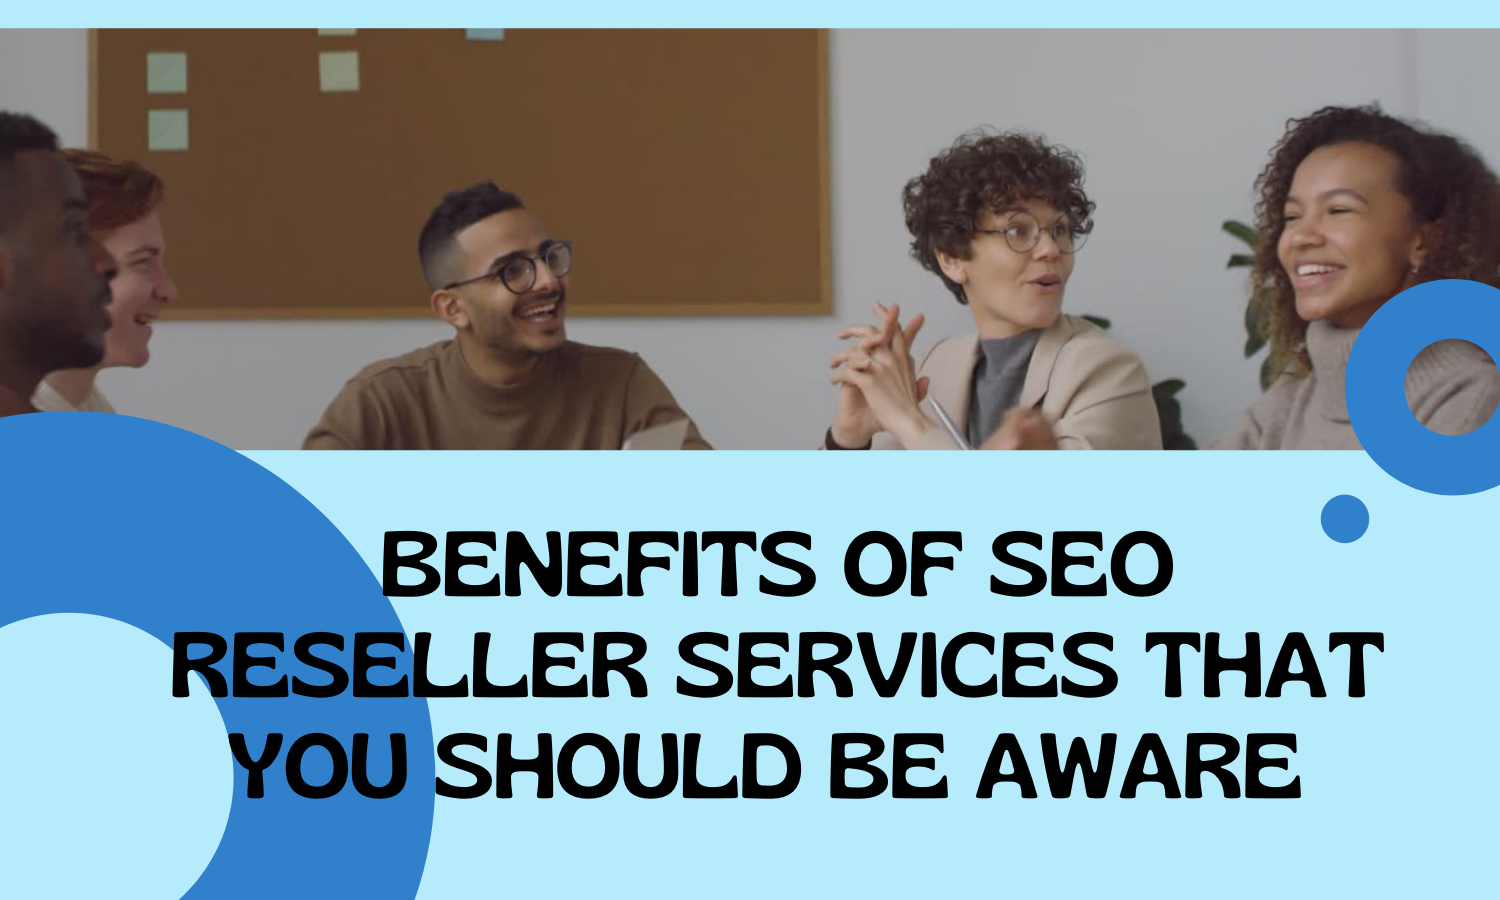 BENEFITS OF SEO RESELLER SERVICES